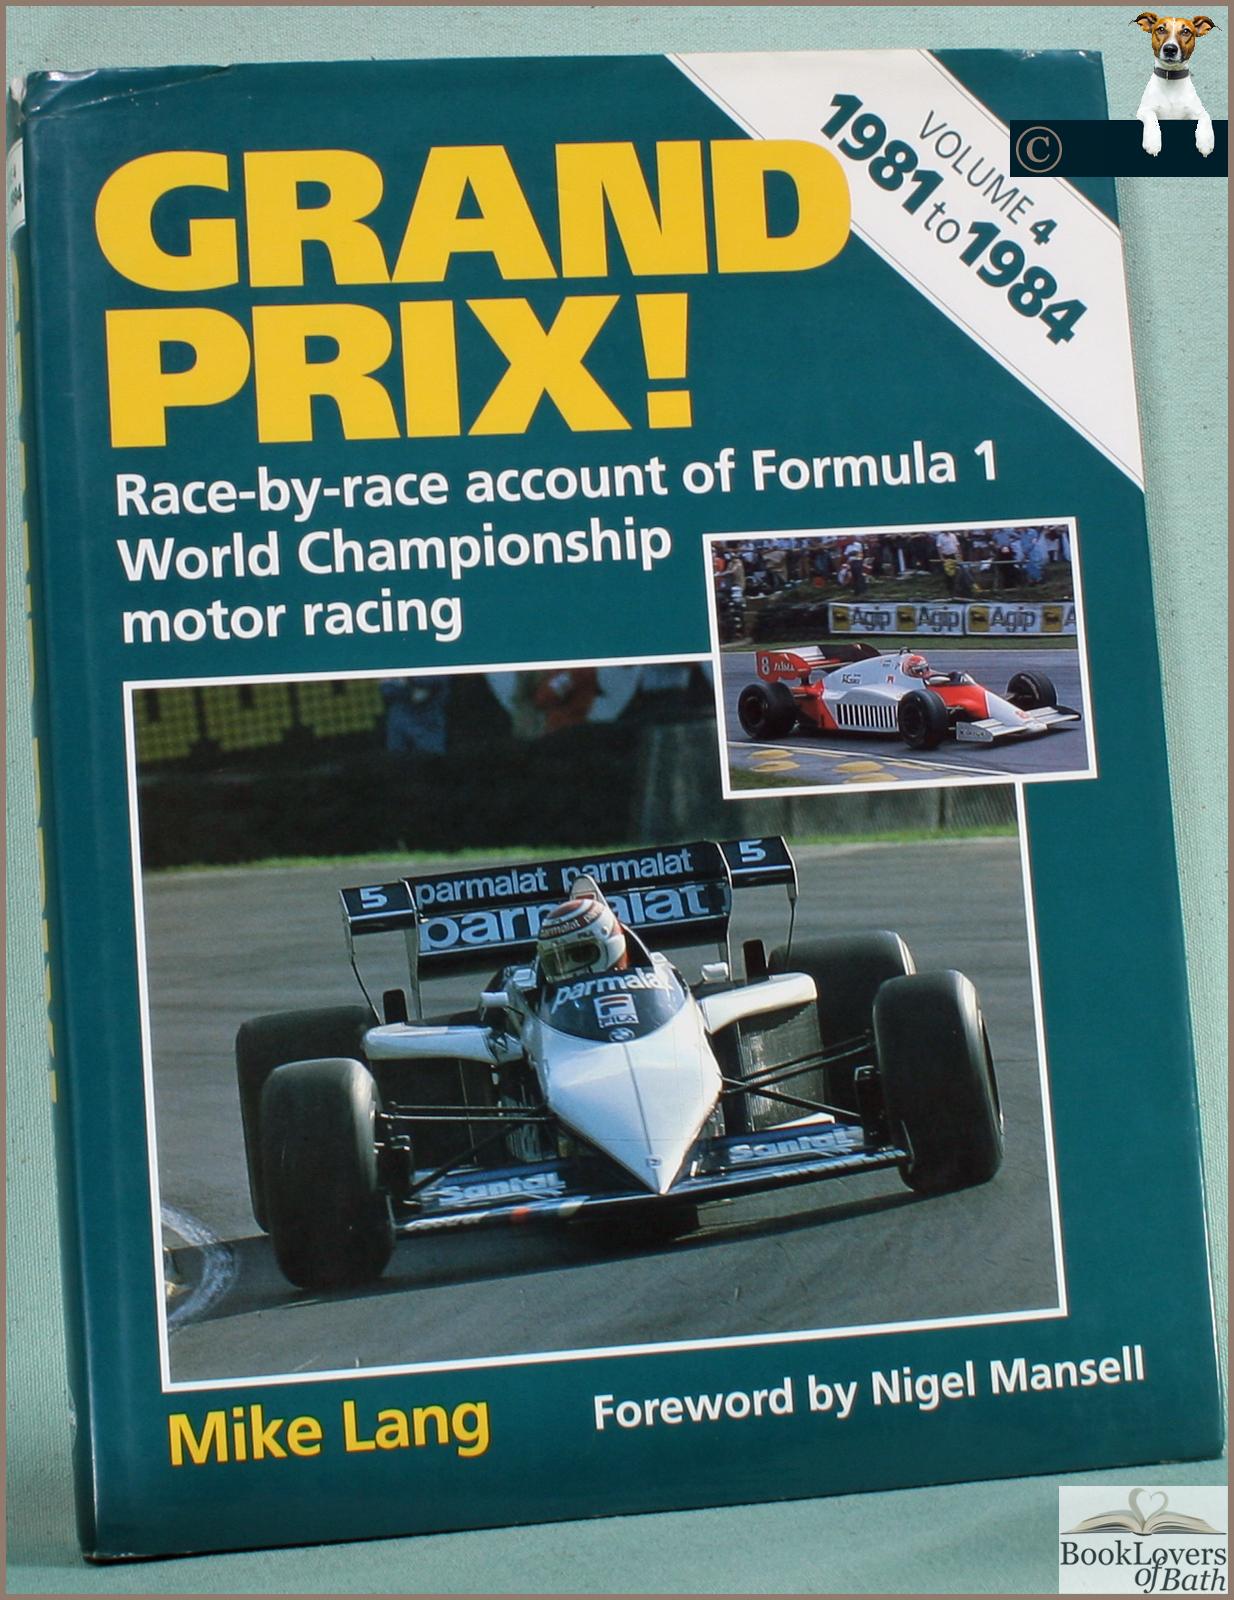 Grand Prix! Volume 4 1981 to 1984: Race-by-race Account of Formula 1 World Championship Motor Racing - Mike Lang